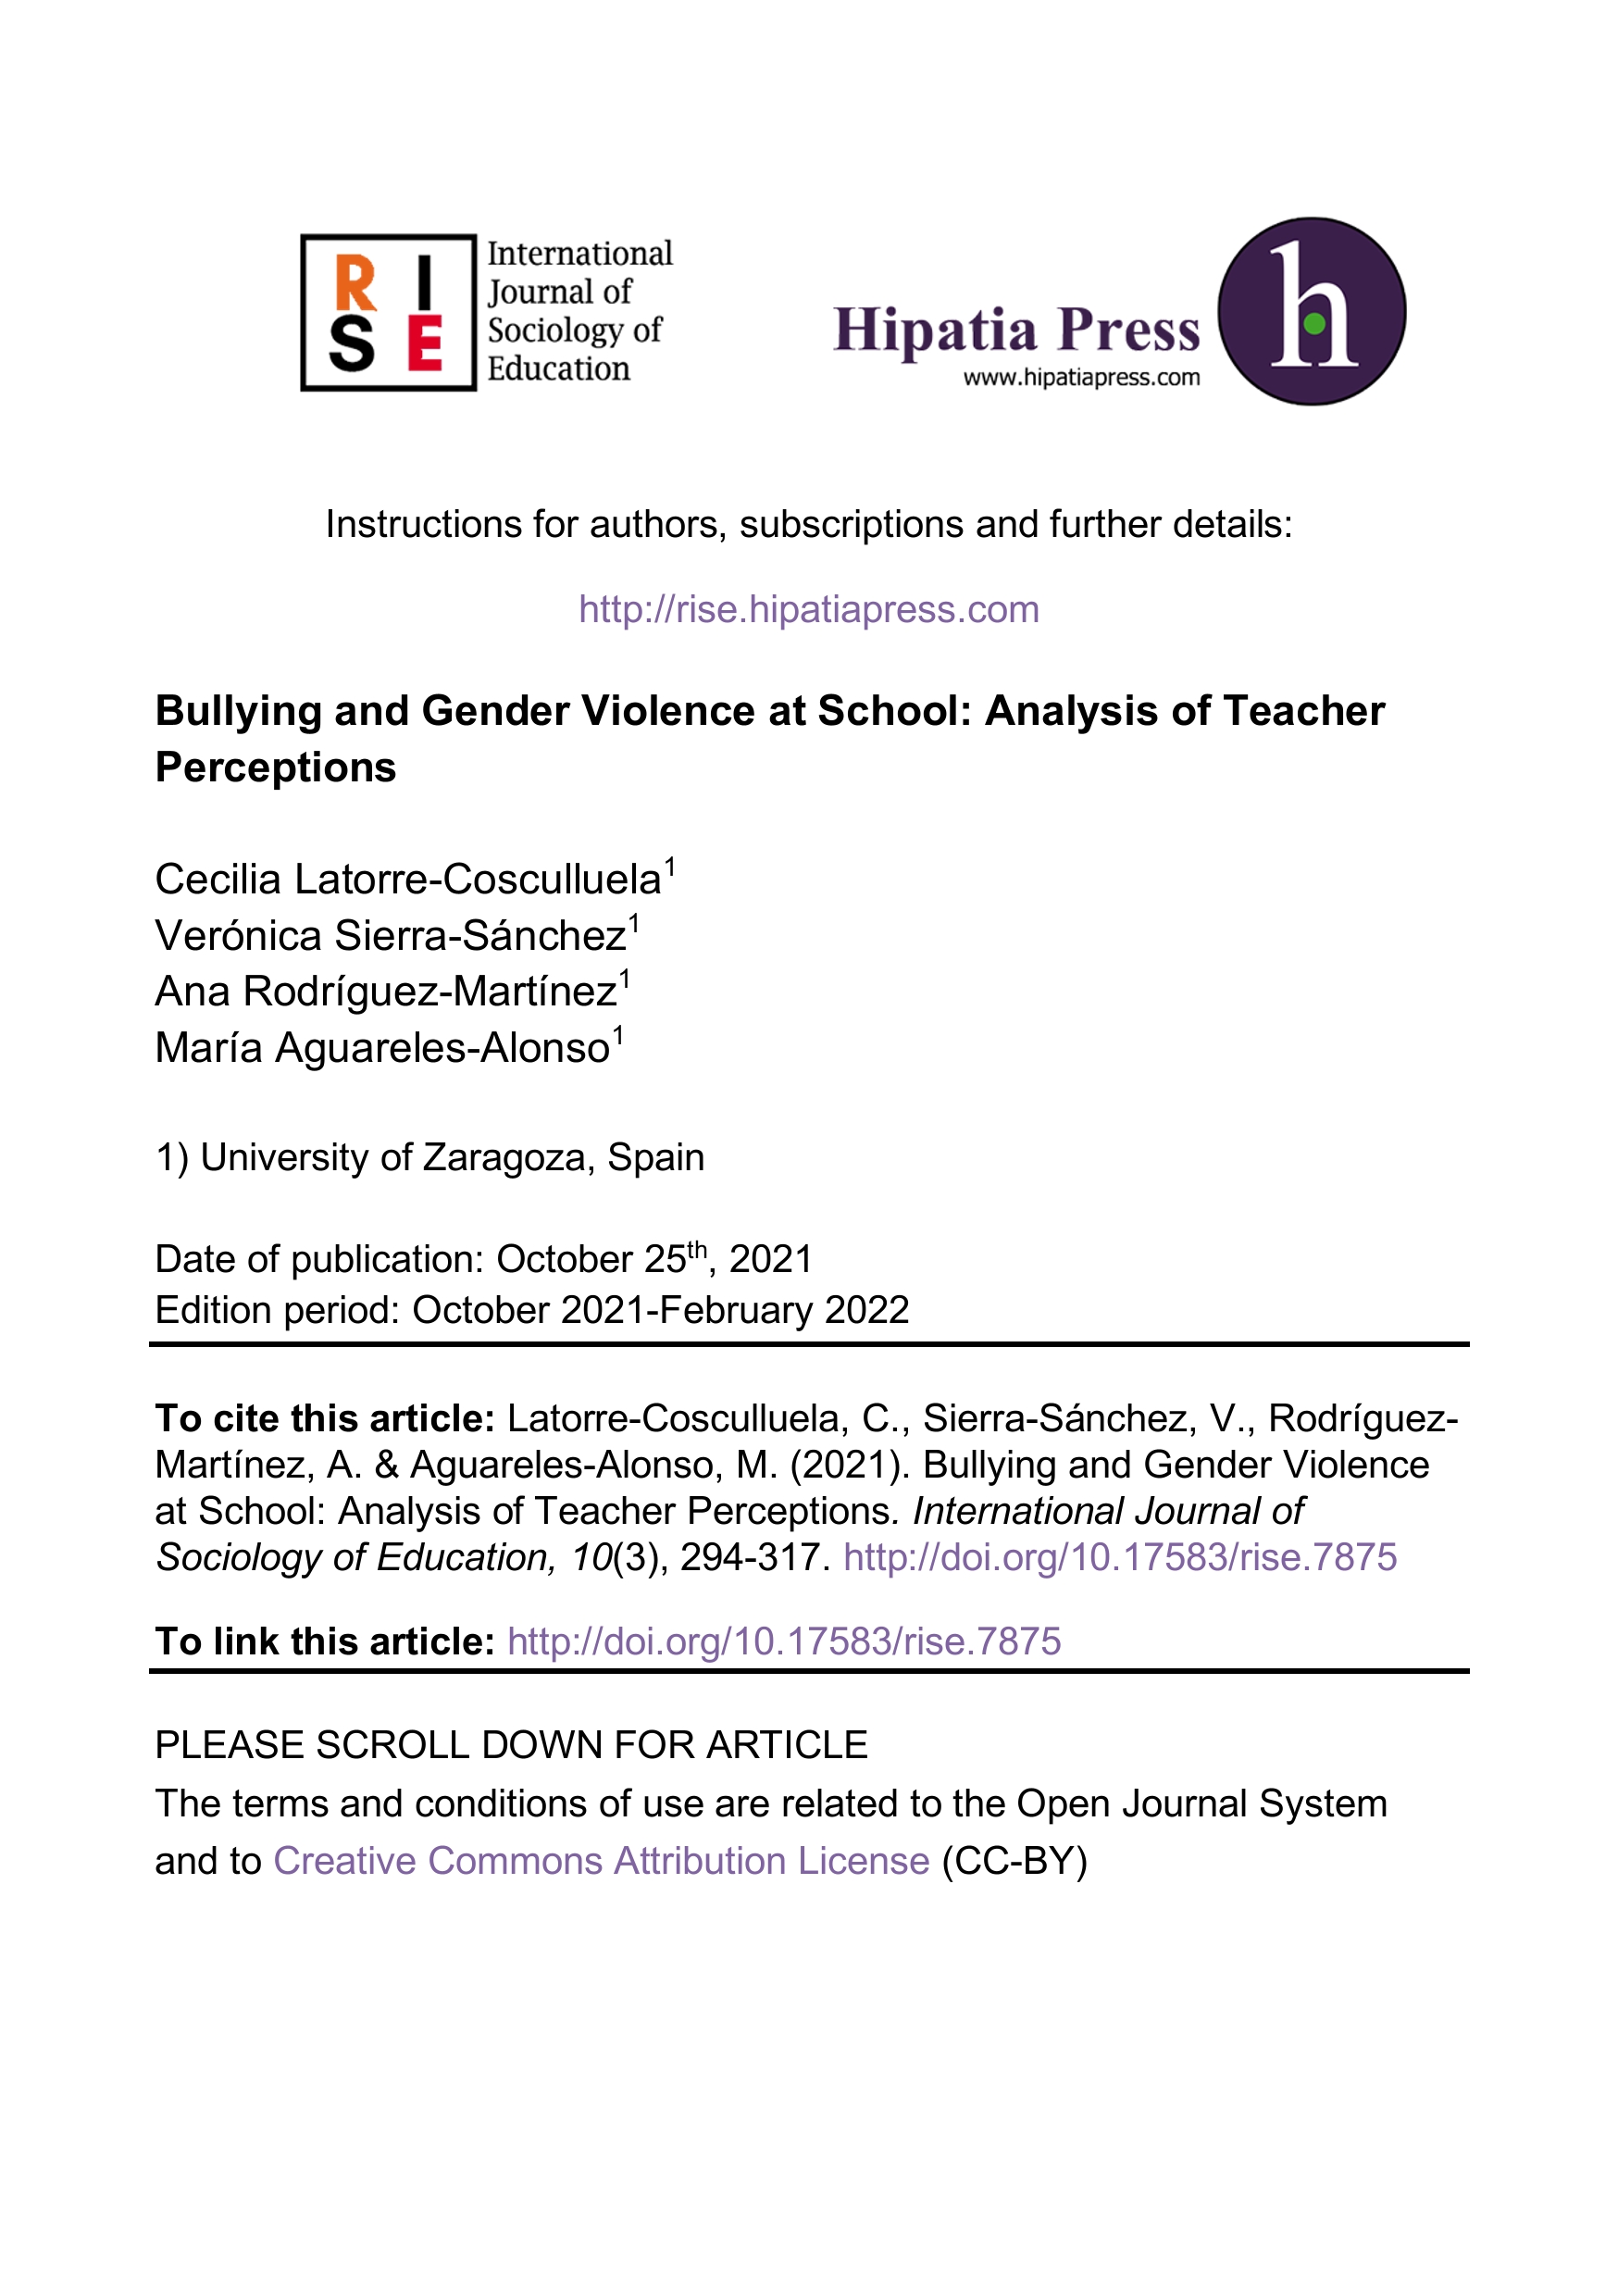 Bullying and gender violence at school: analysis of teacher perception